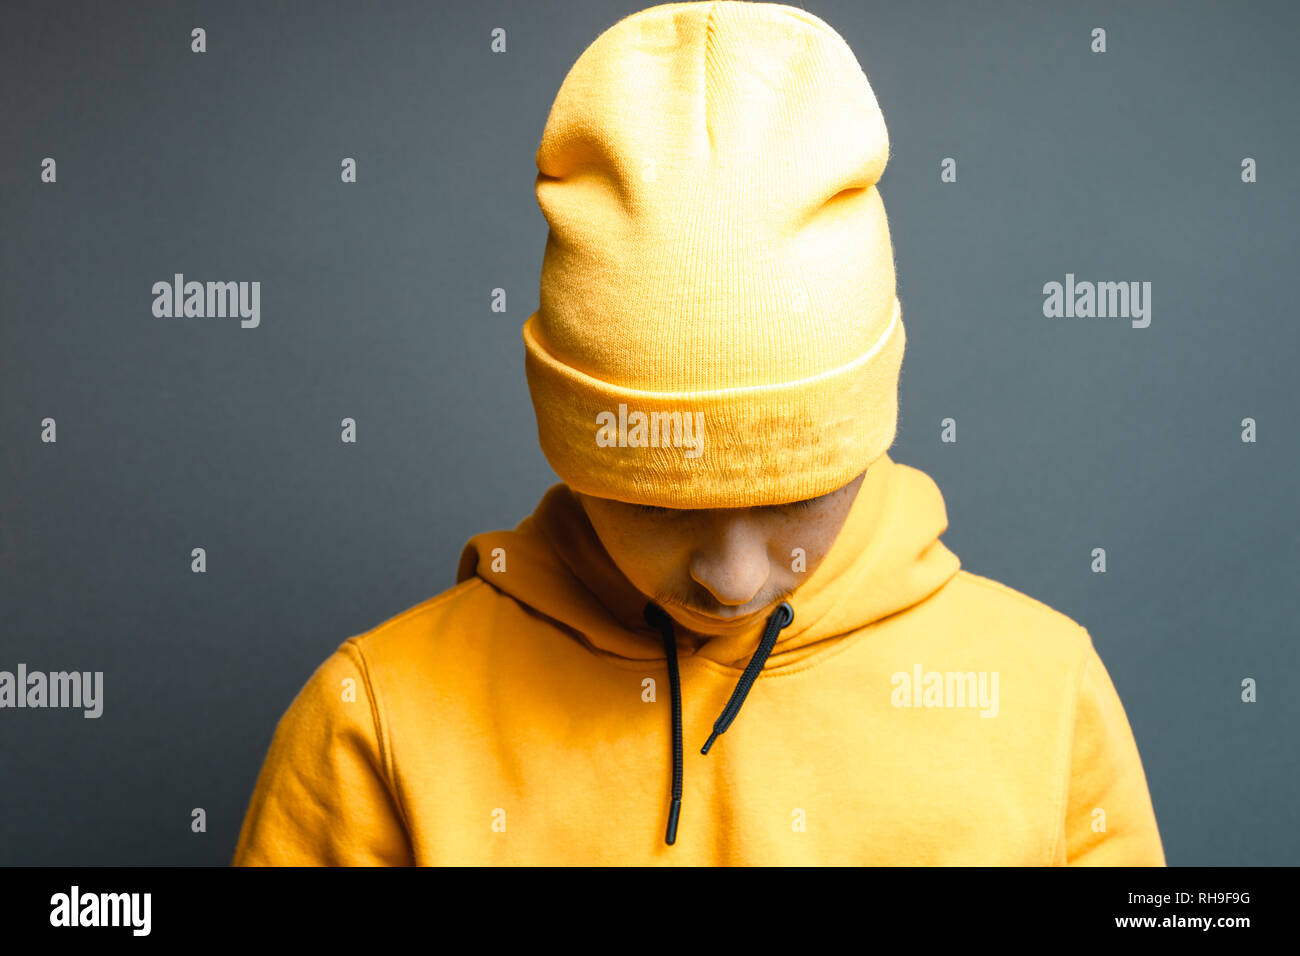 portrait of young rapper with yellow beanie cap and hoodie looking down in front of grey background Stock Photo